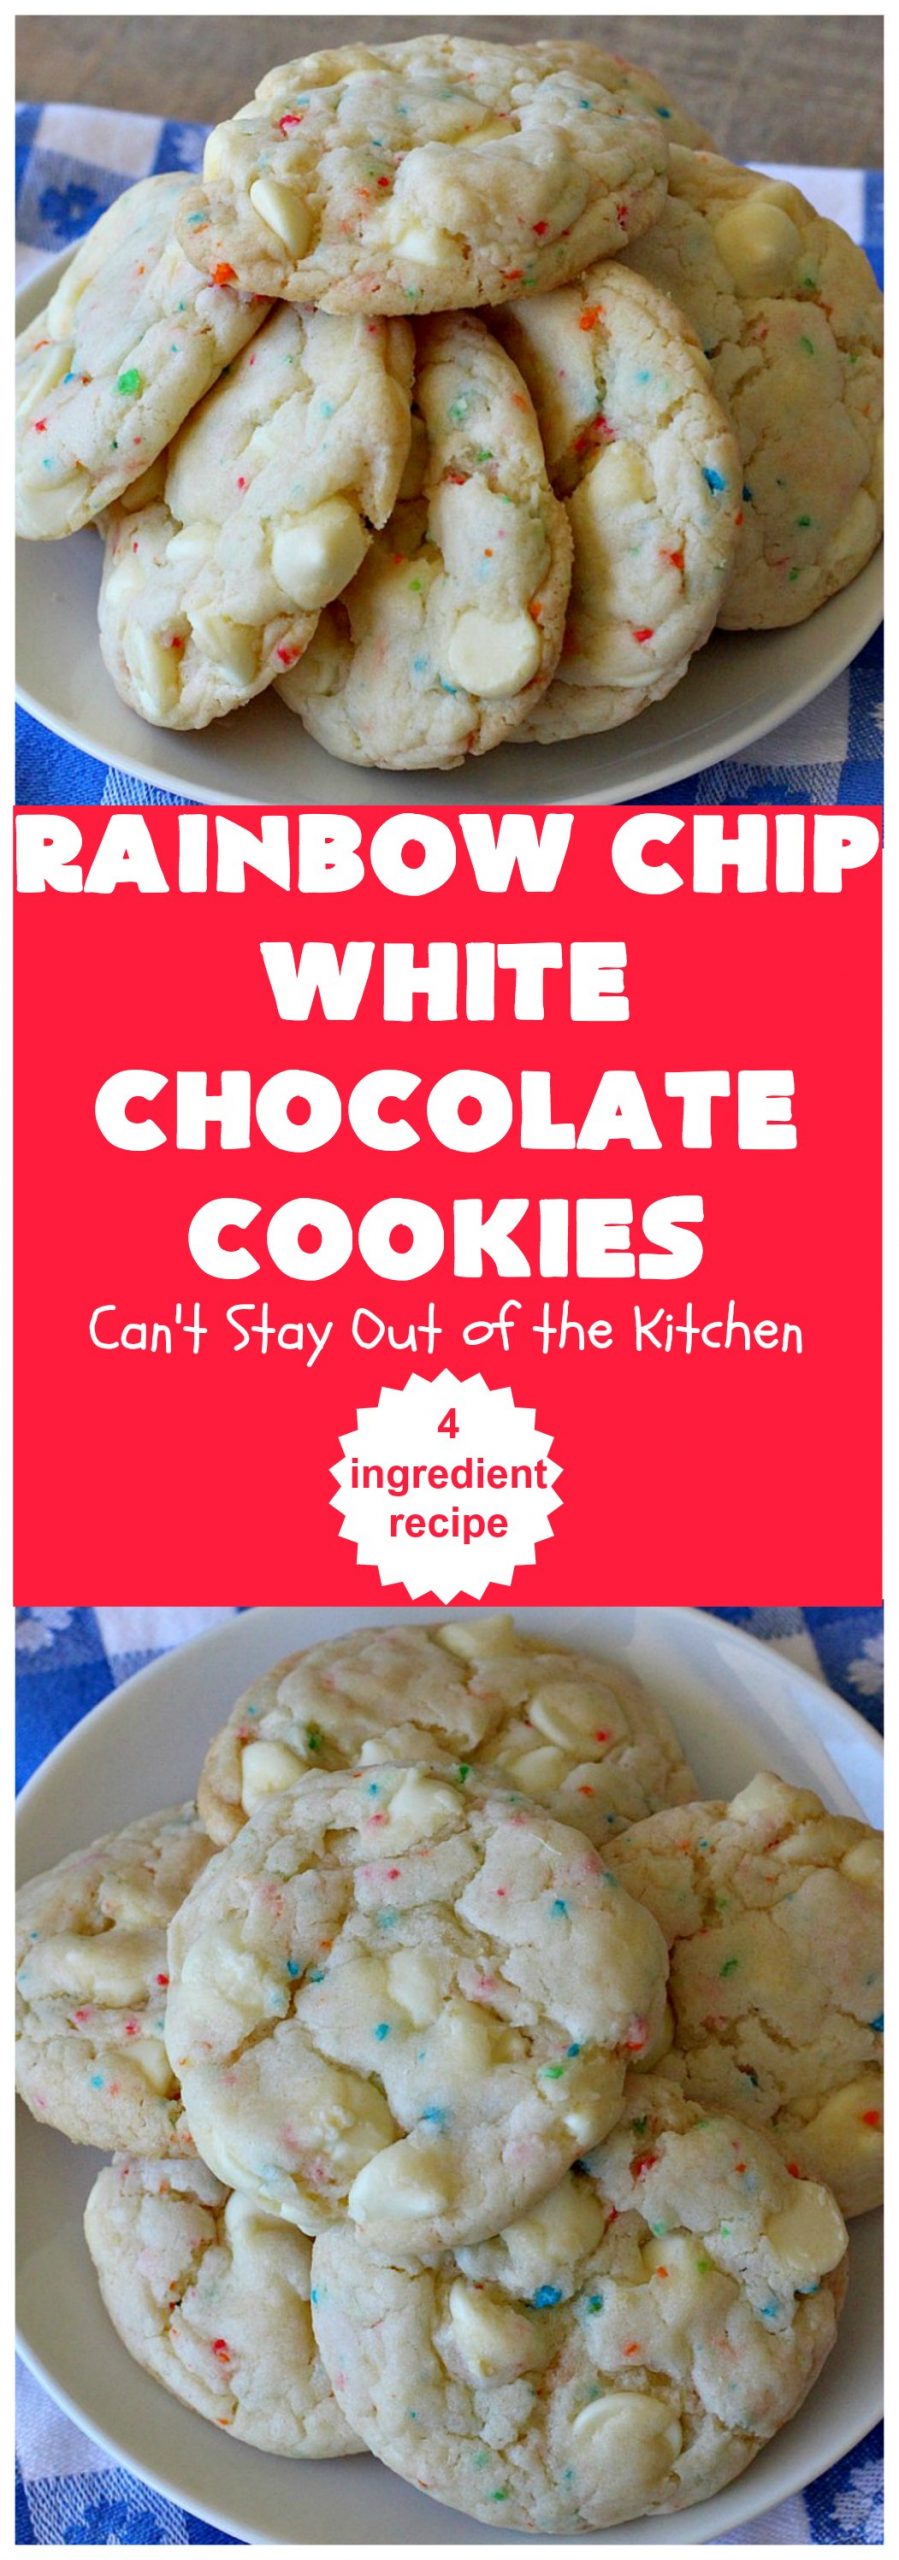 Rainbow Chip White Chocolate Cookies | Can't Stay Out of the Kitchen